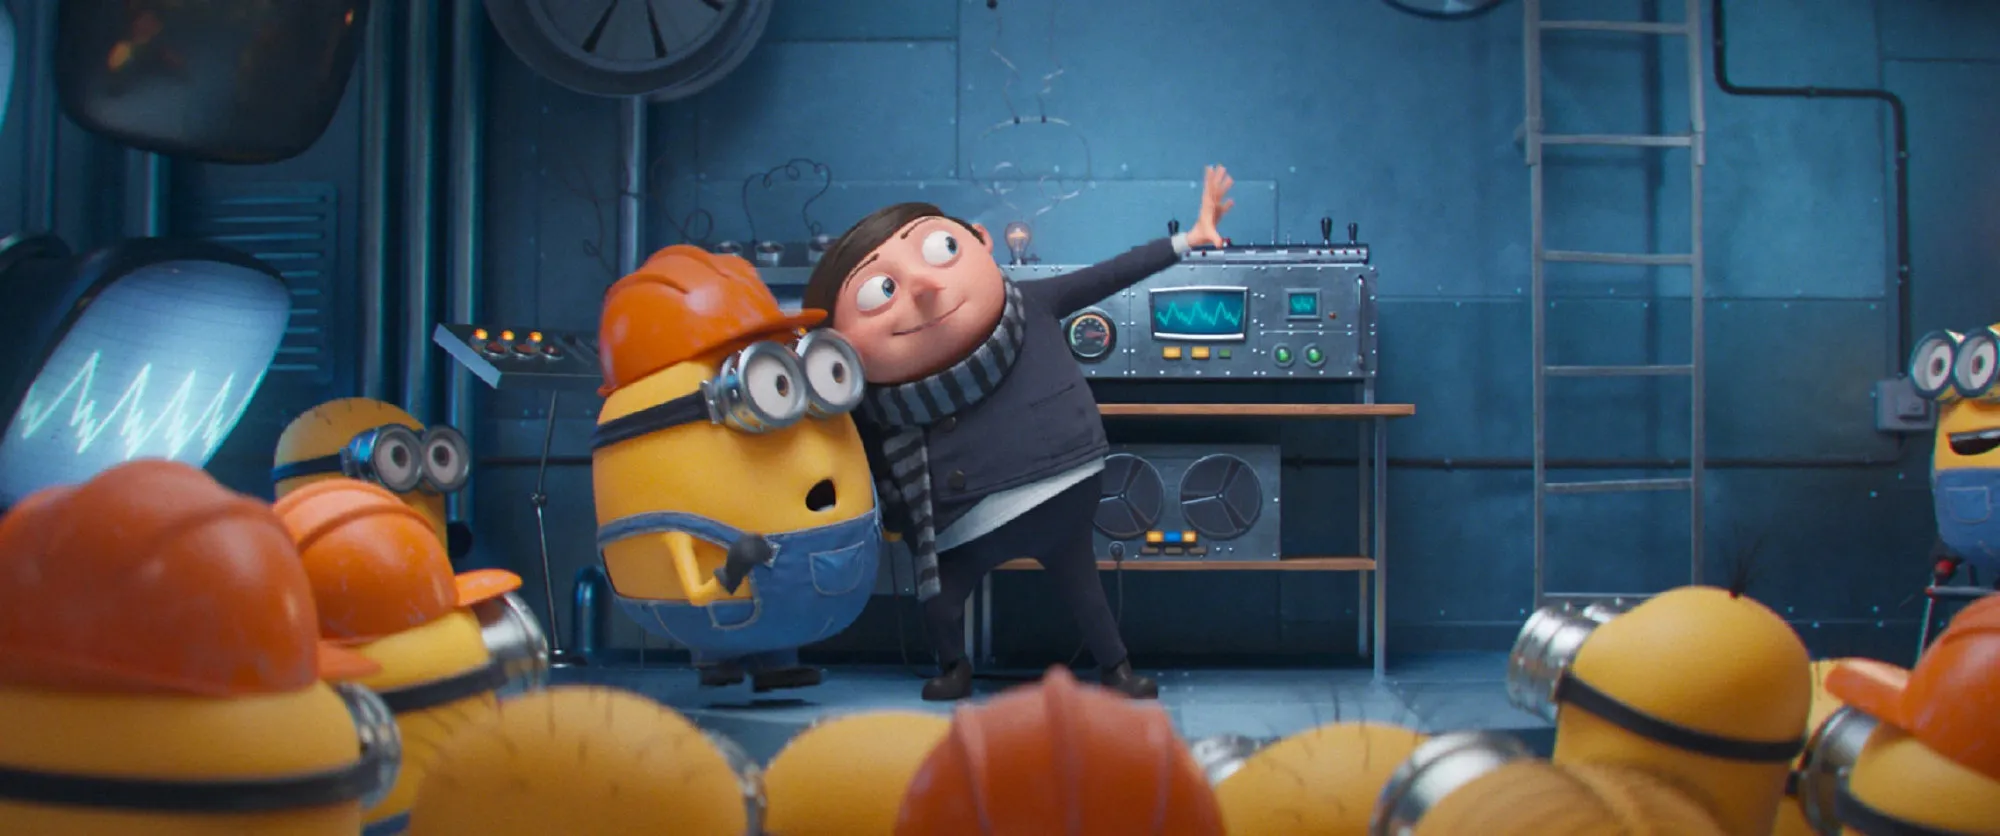 "Minions: The Rise of Gru" North American first week box office record-breaking | FMV6